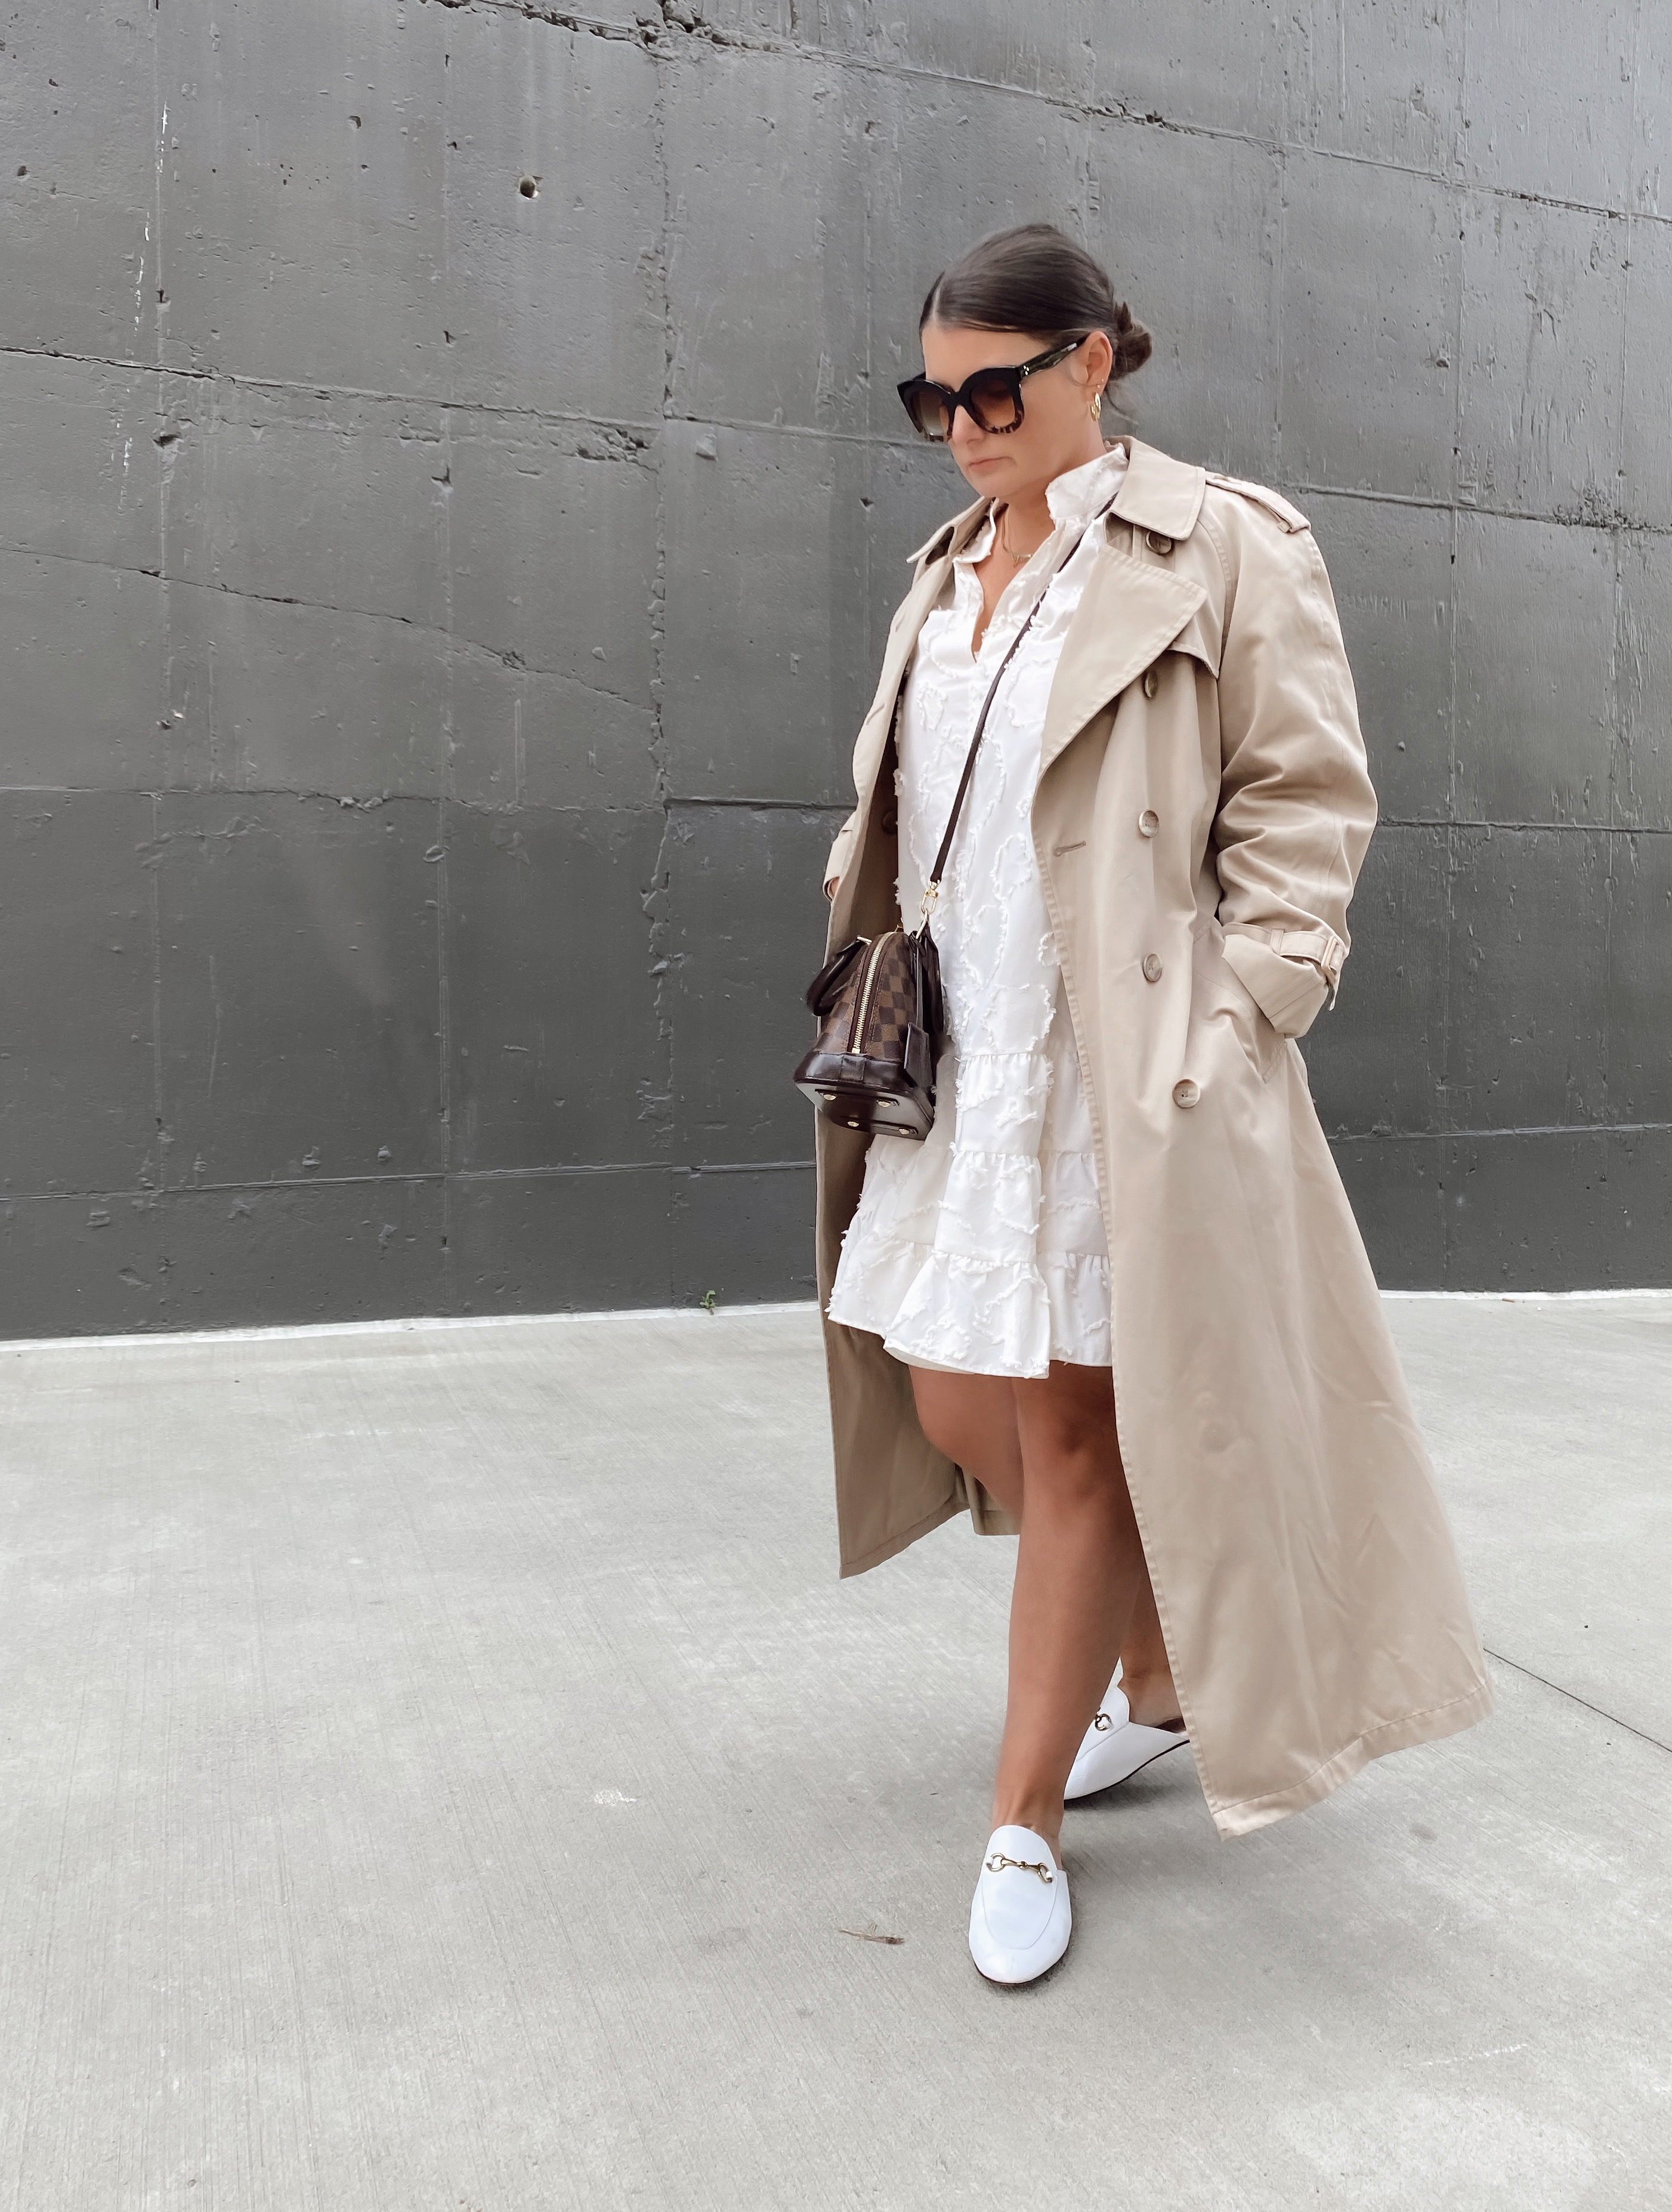 5 WAYS TO WEAR A TRENCH COAT: http://www.juliamarieb.com/2020/11/01/5-ways-to-wear-a-trench-coat-|-the-rule-of-5/  |   @julia.marie.b